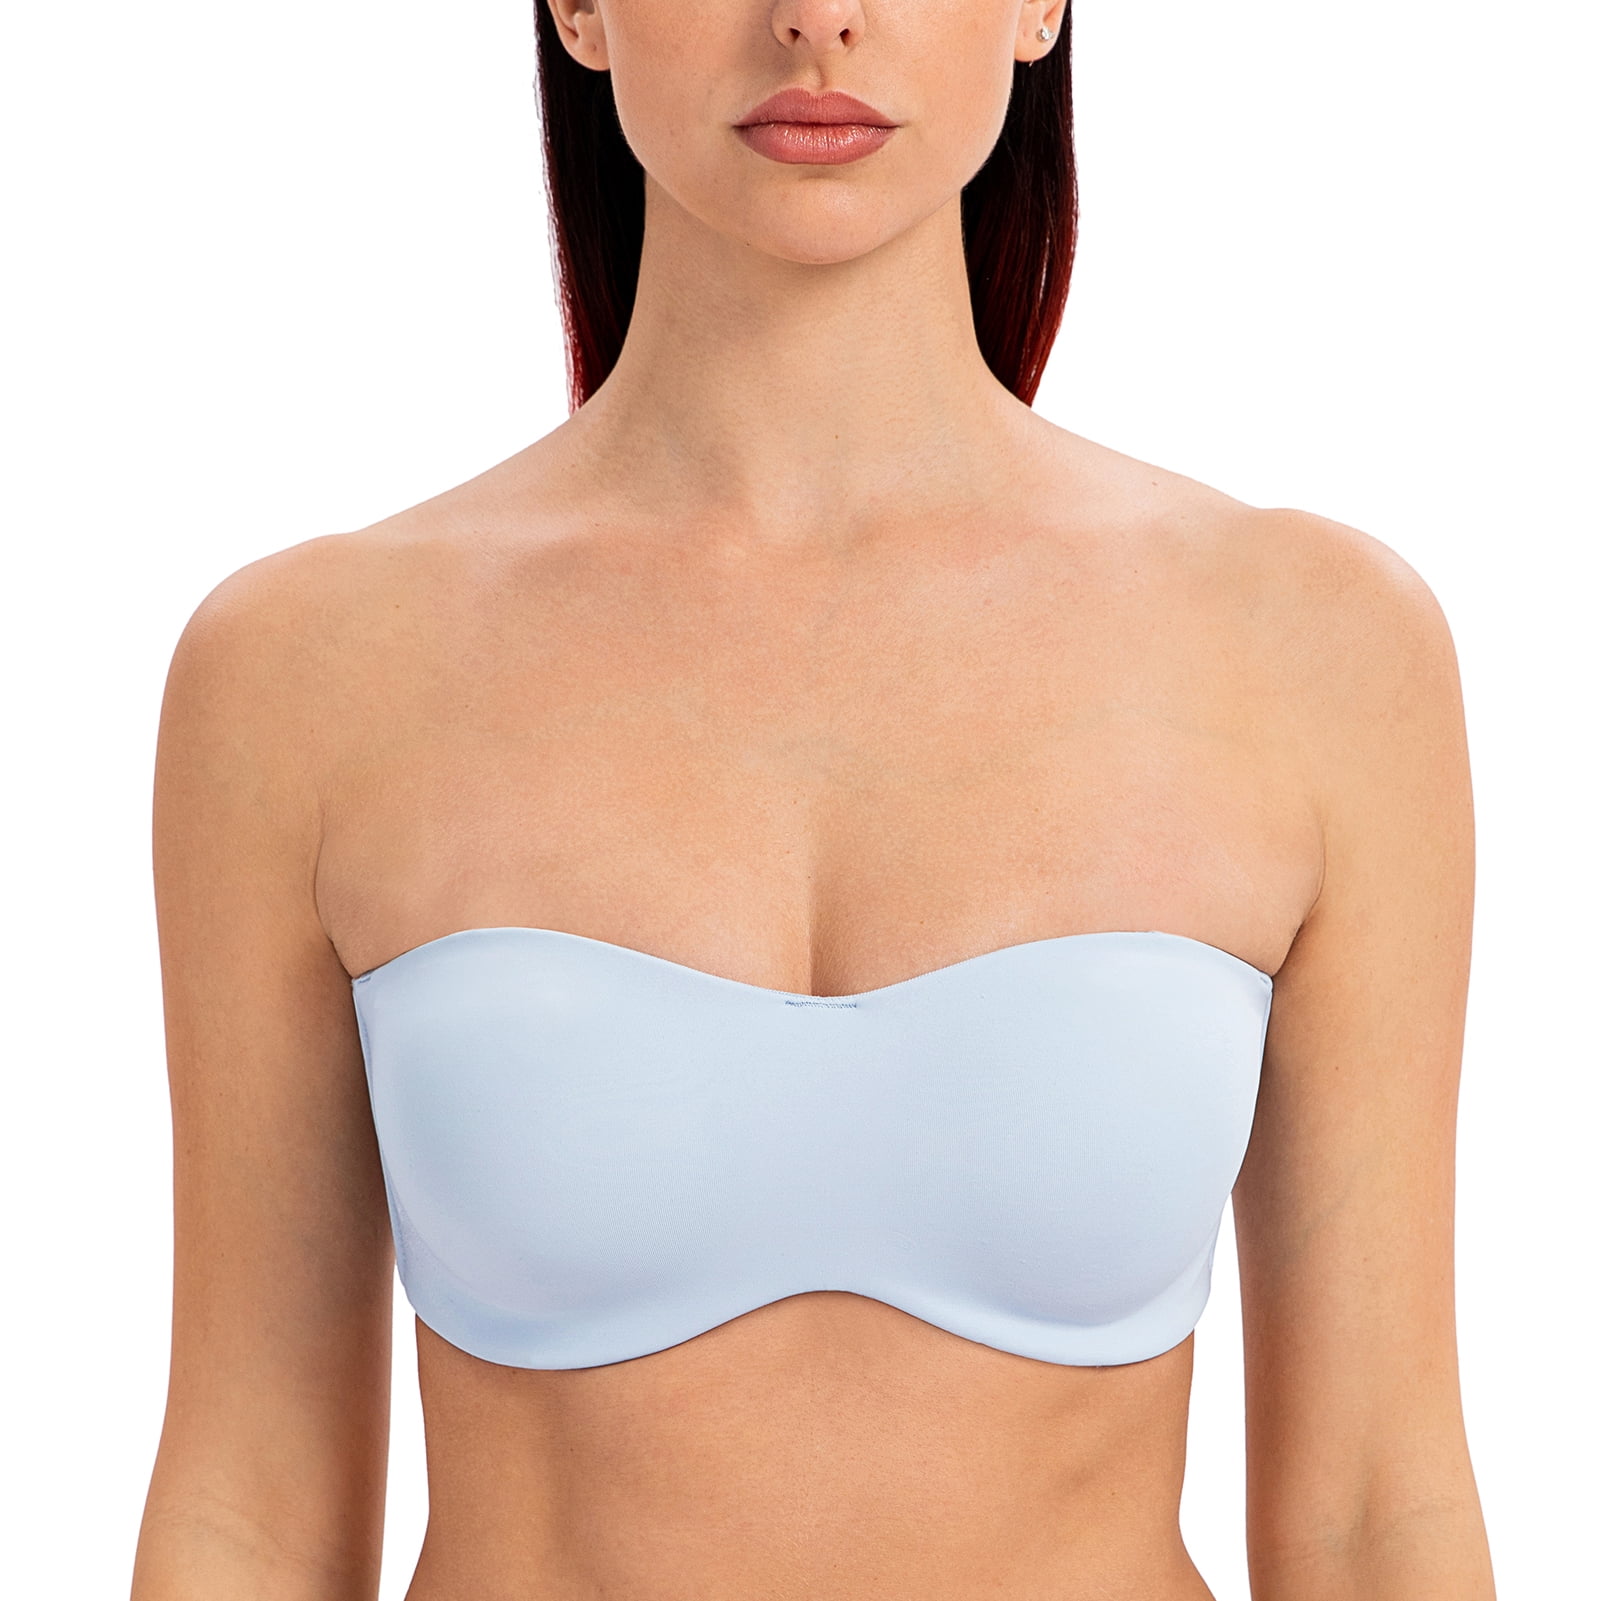 MELENECA Strapless Bra Minimizer with Underwire for Women Pale Nude 34DD